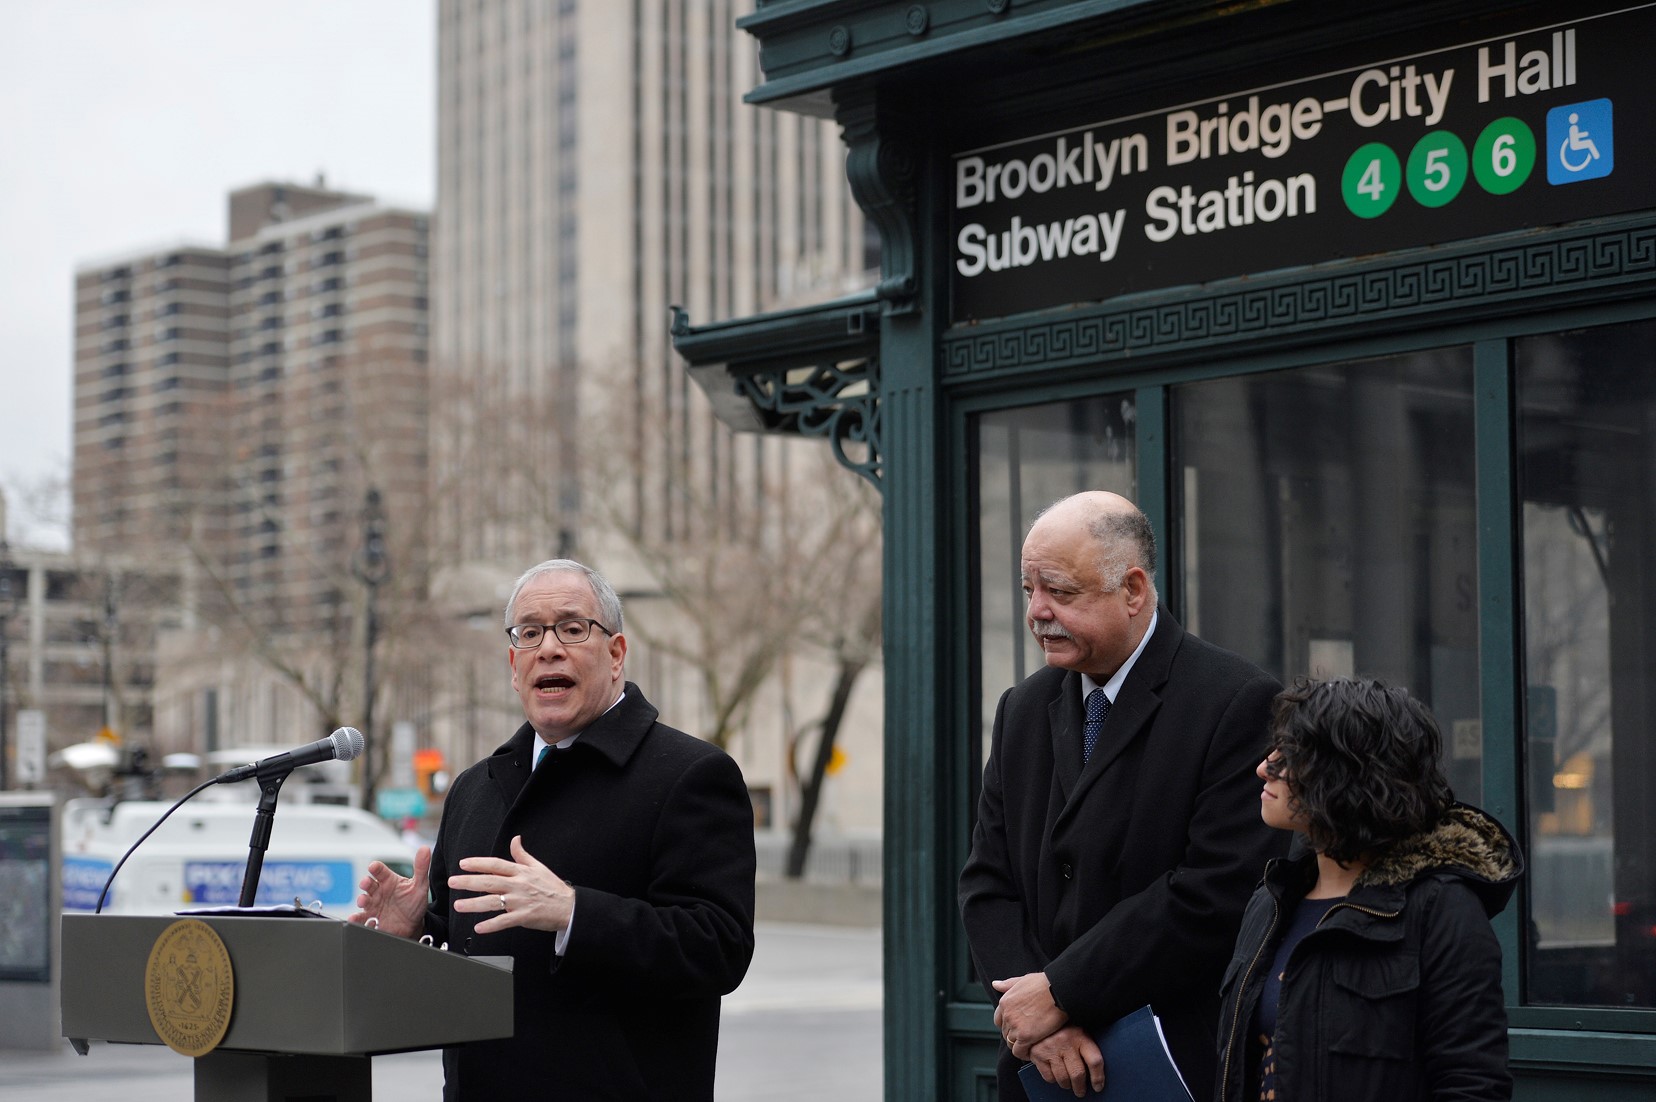 NYC Comptroller Scott M. Stringer joined by the Community Service Society and Riders Alliance.